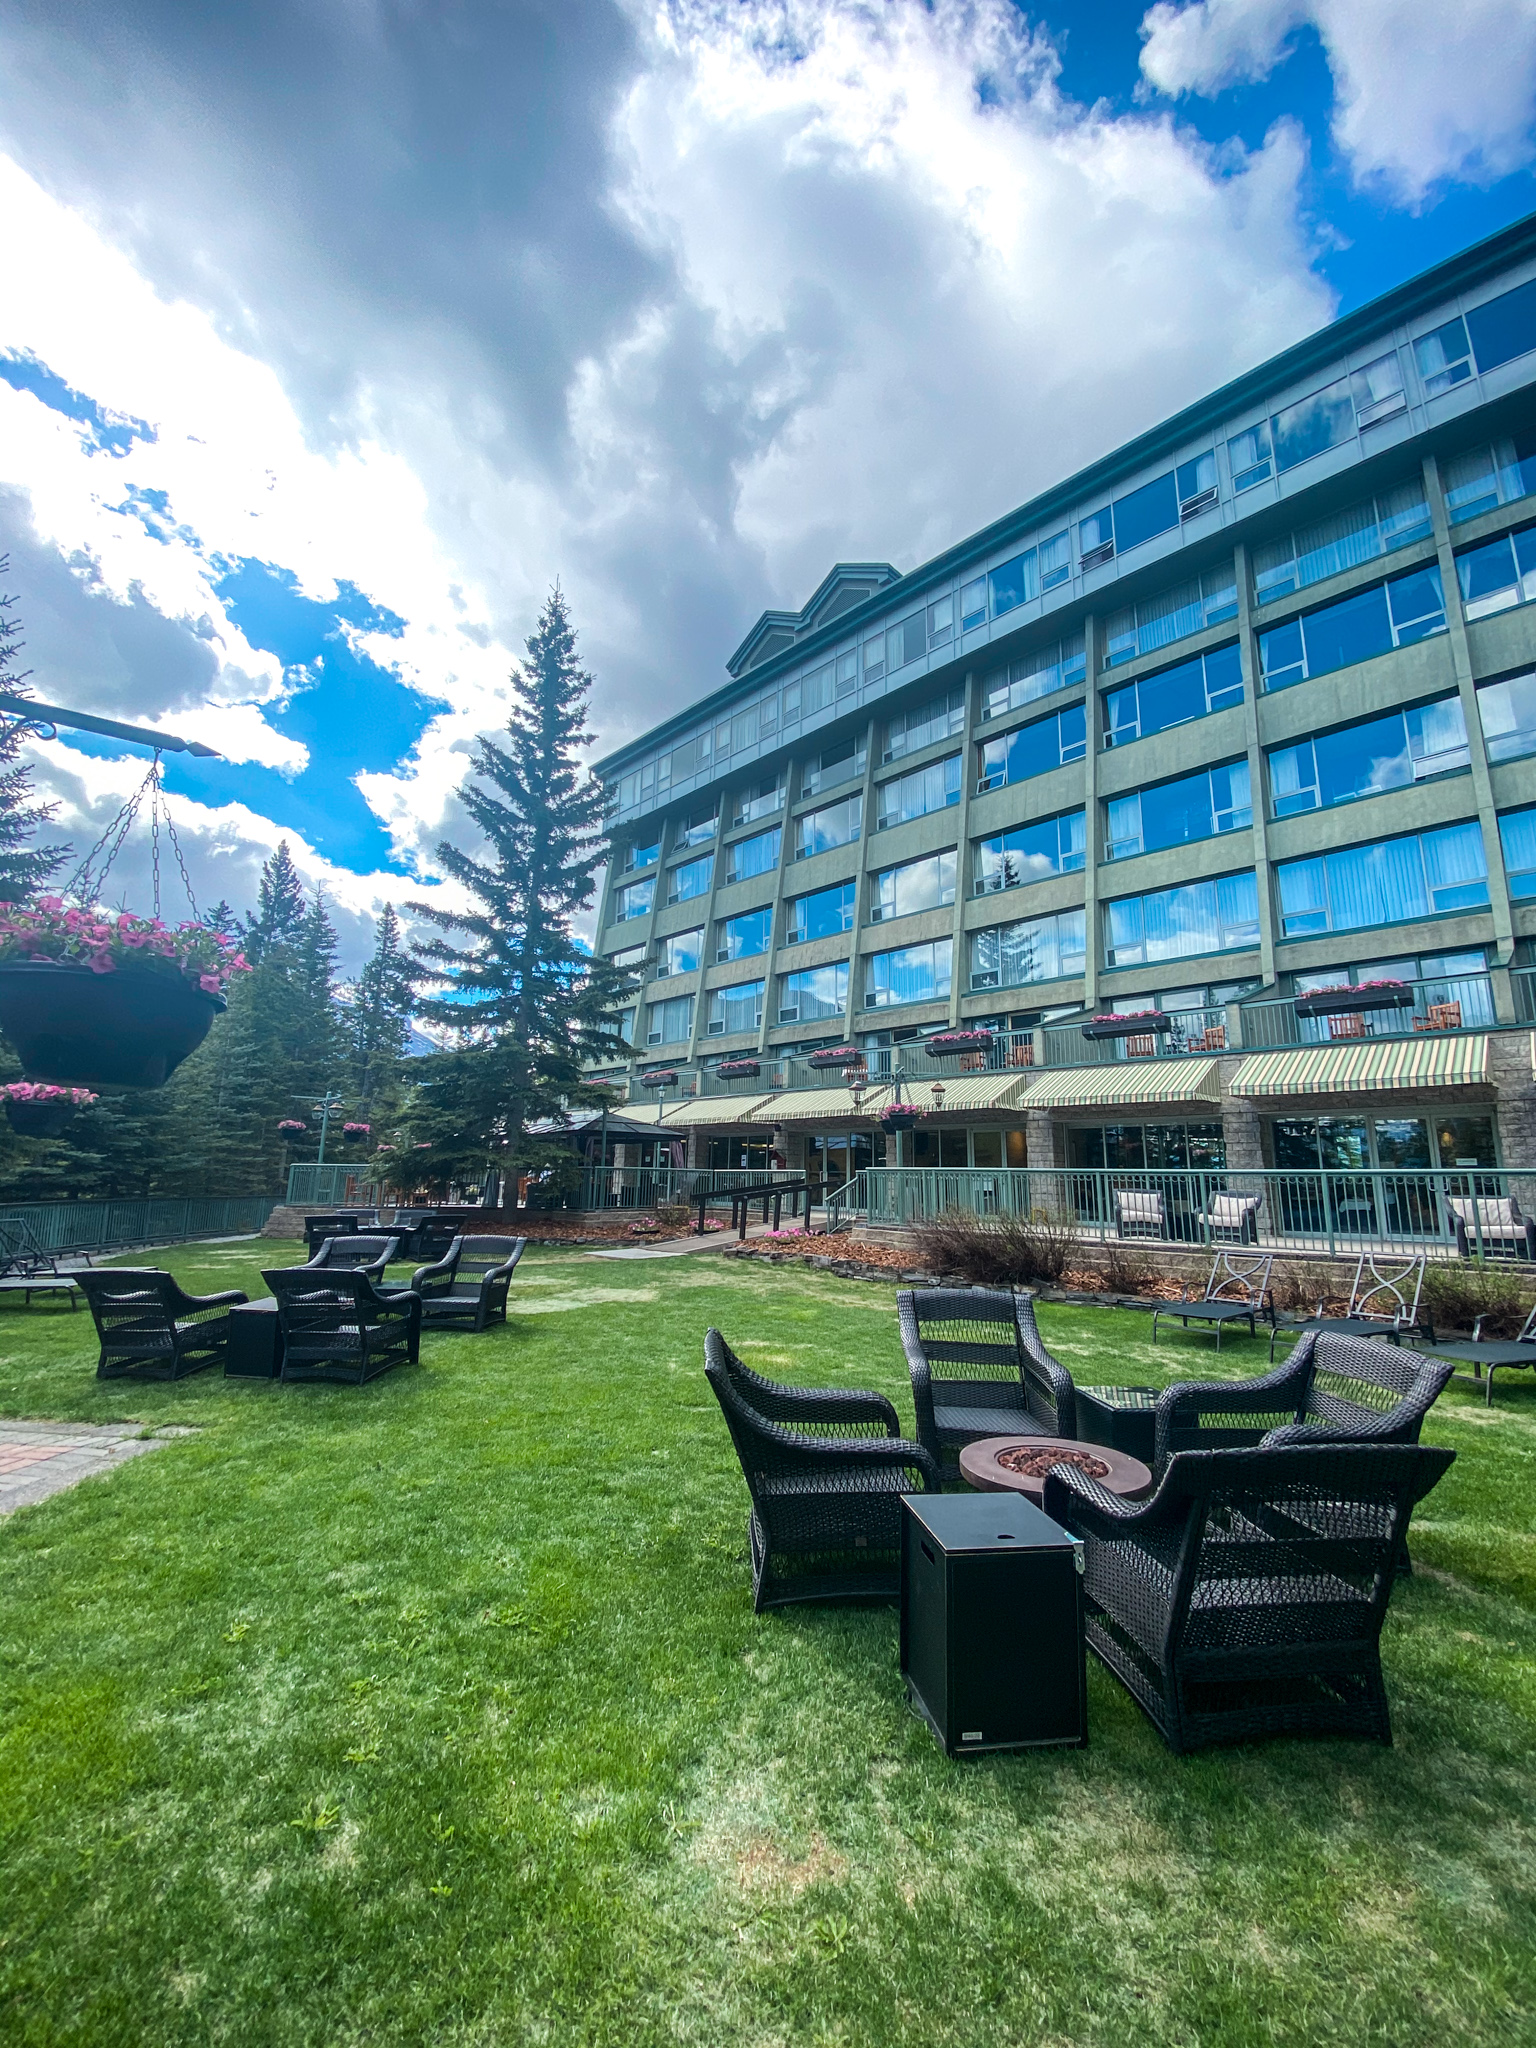 The Rimrock resorts courtyard and firepits